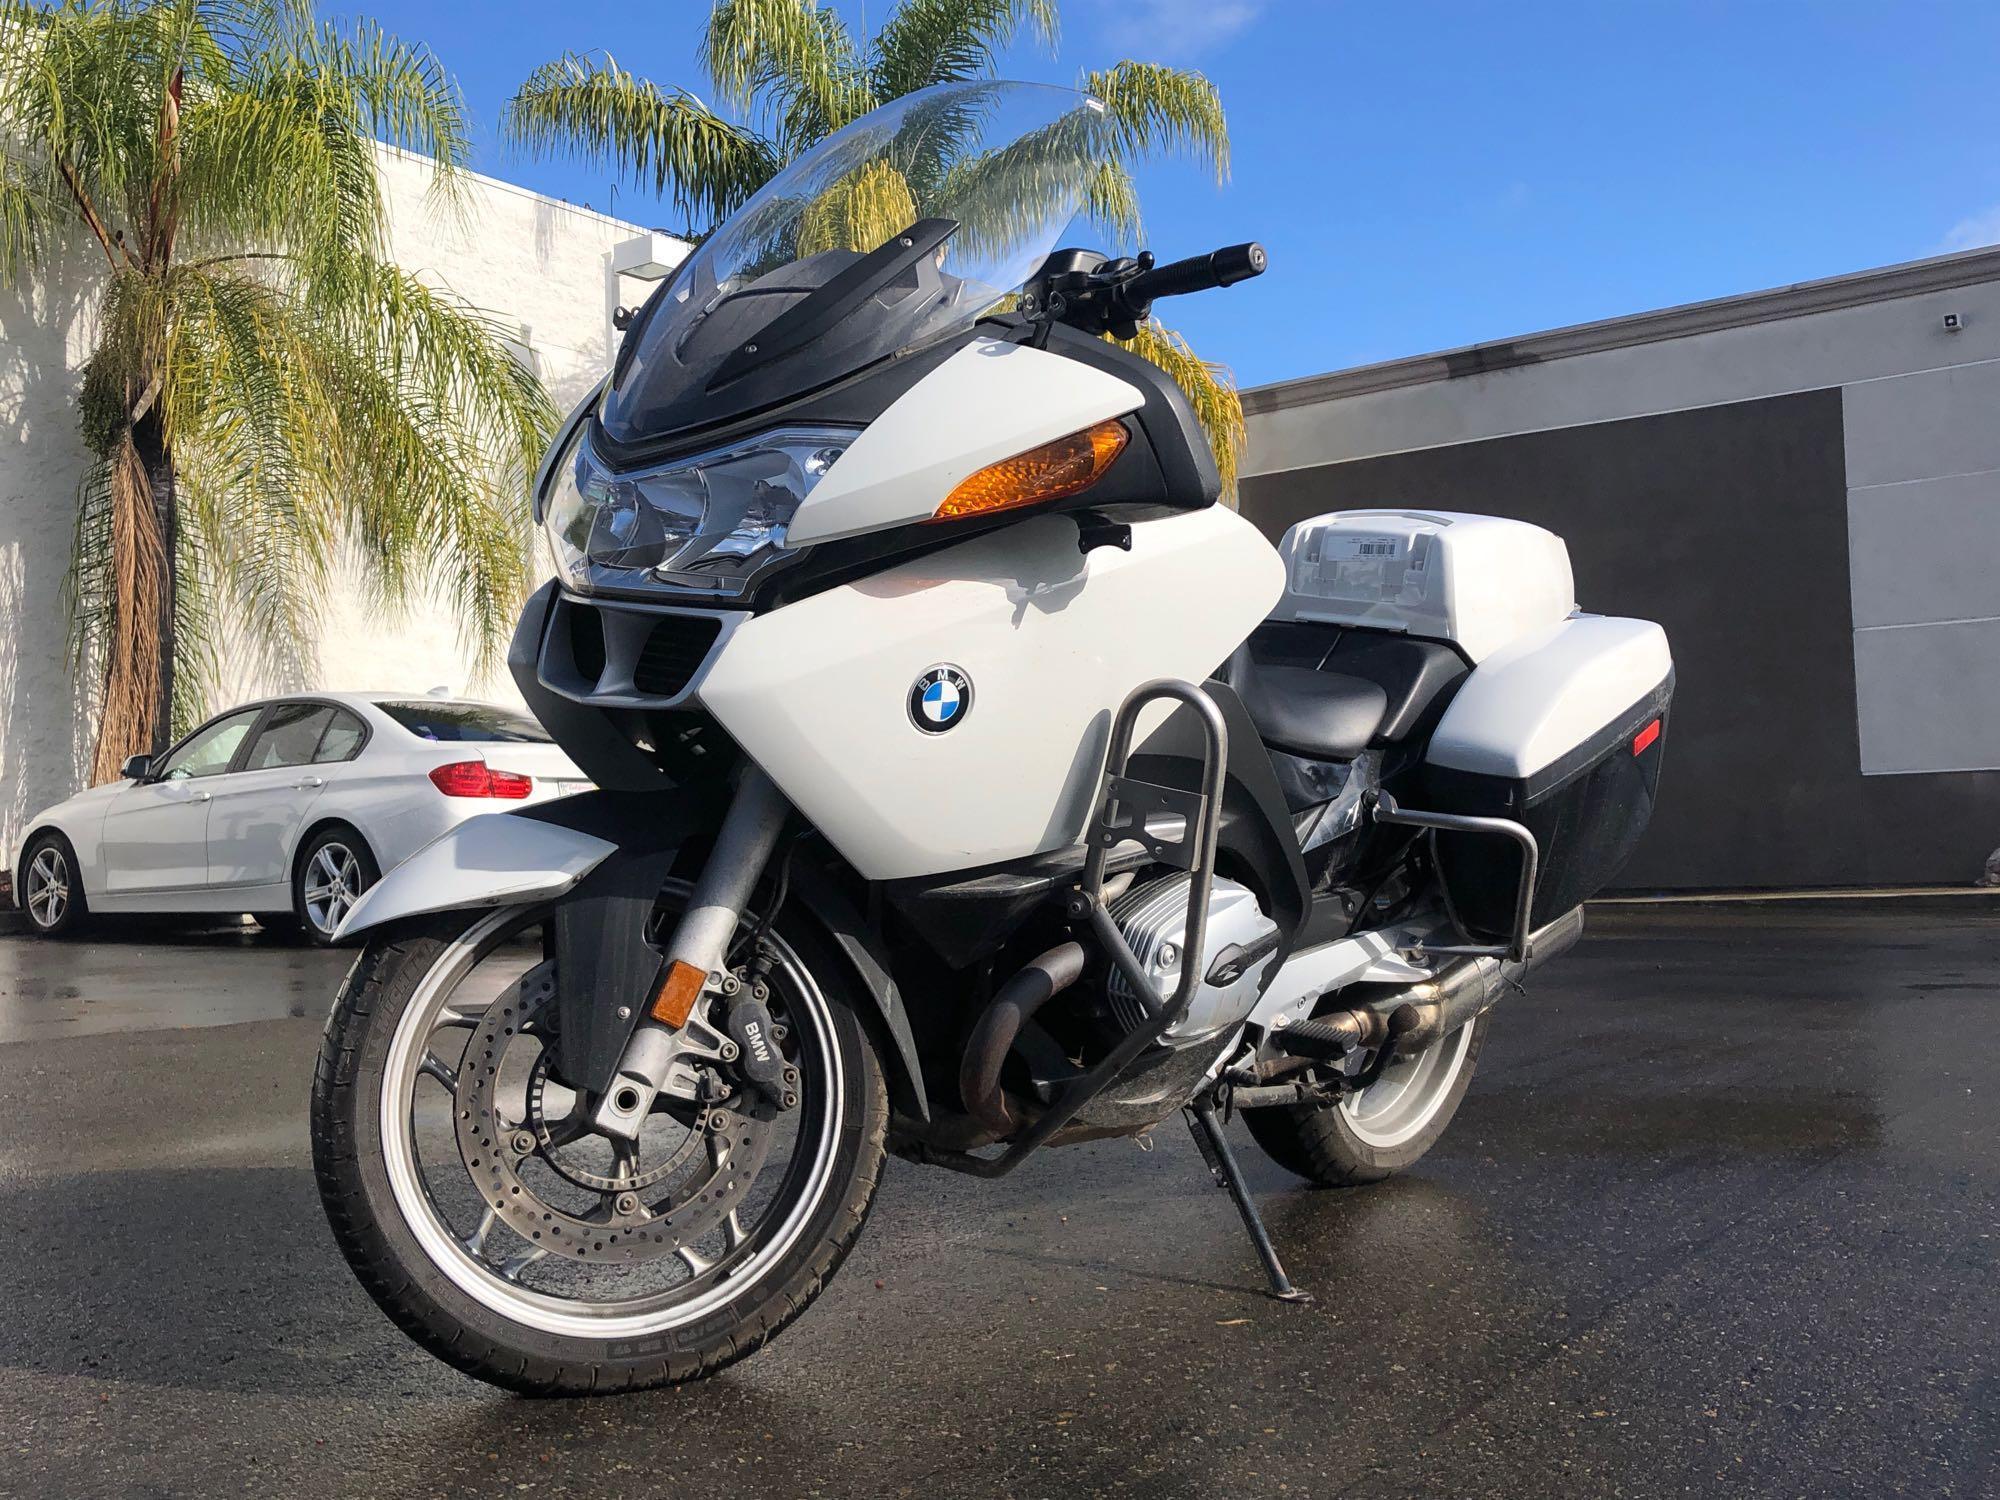 2007 BMW R1200RT-P Retired Police Motorcycle 62,557 Miles